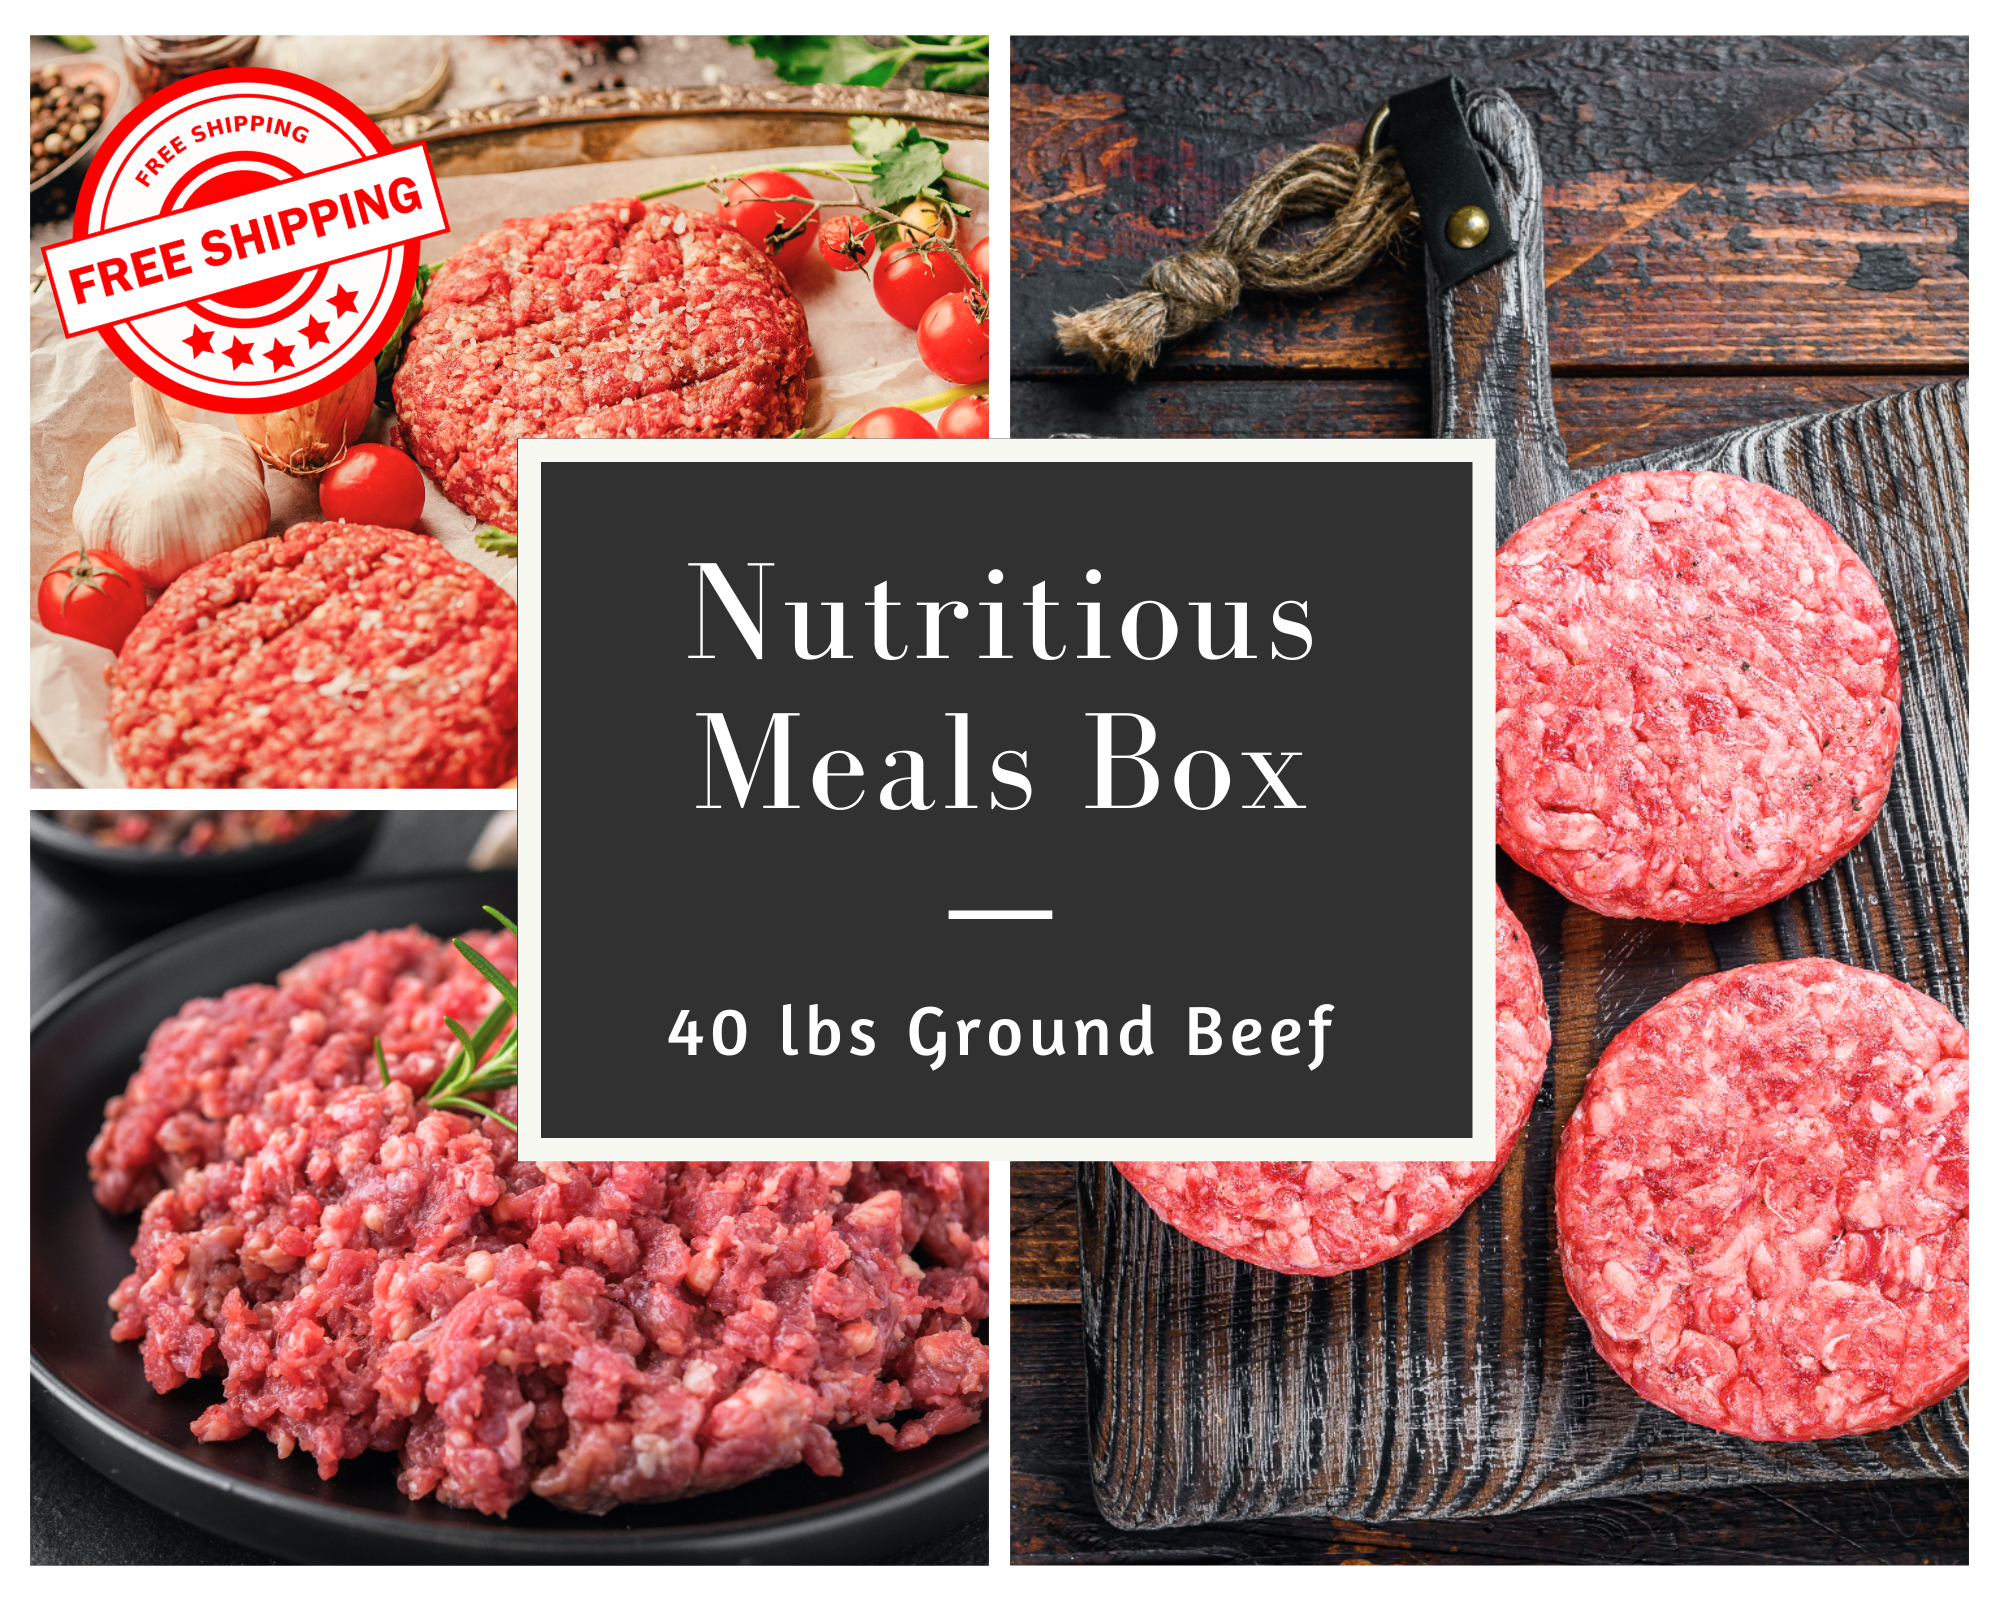 Nutritious Meals Box - 40lb Ground Beef